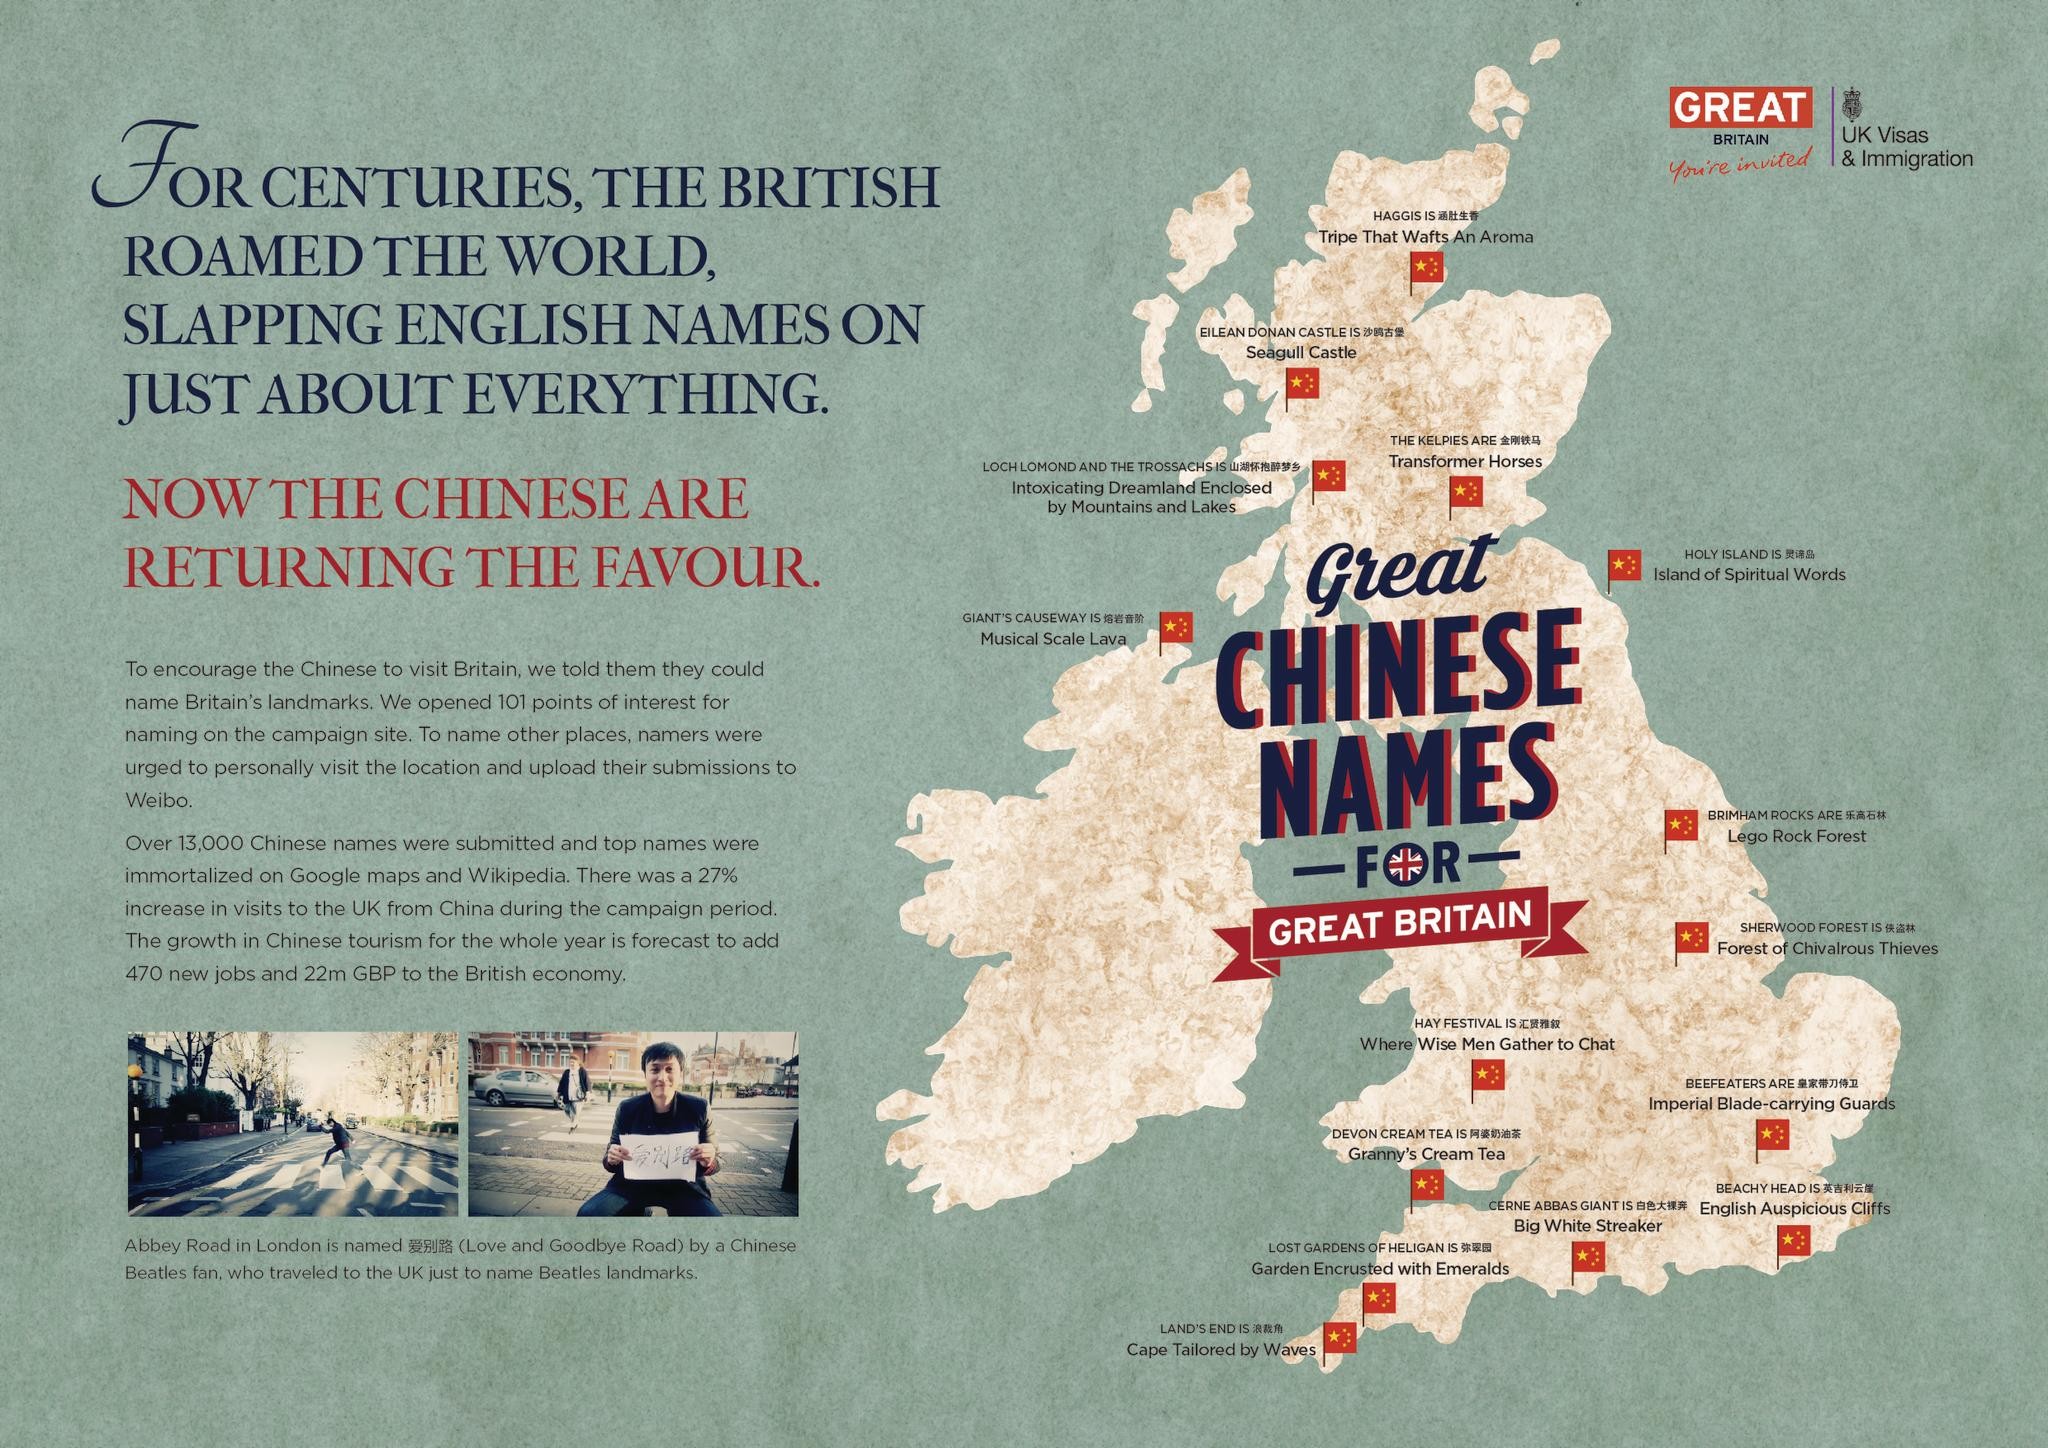 GREAT CHINESE NAMES FOR GREAT BRITAIN